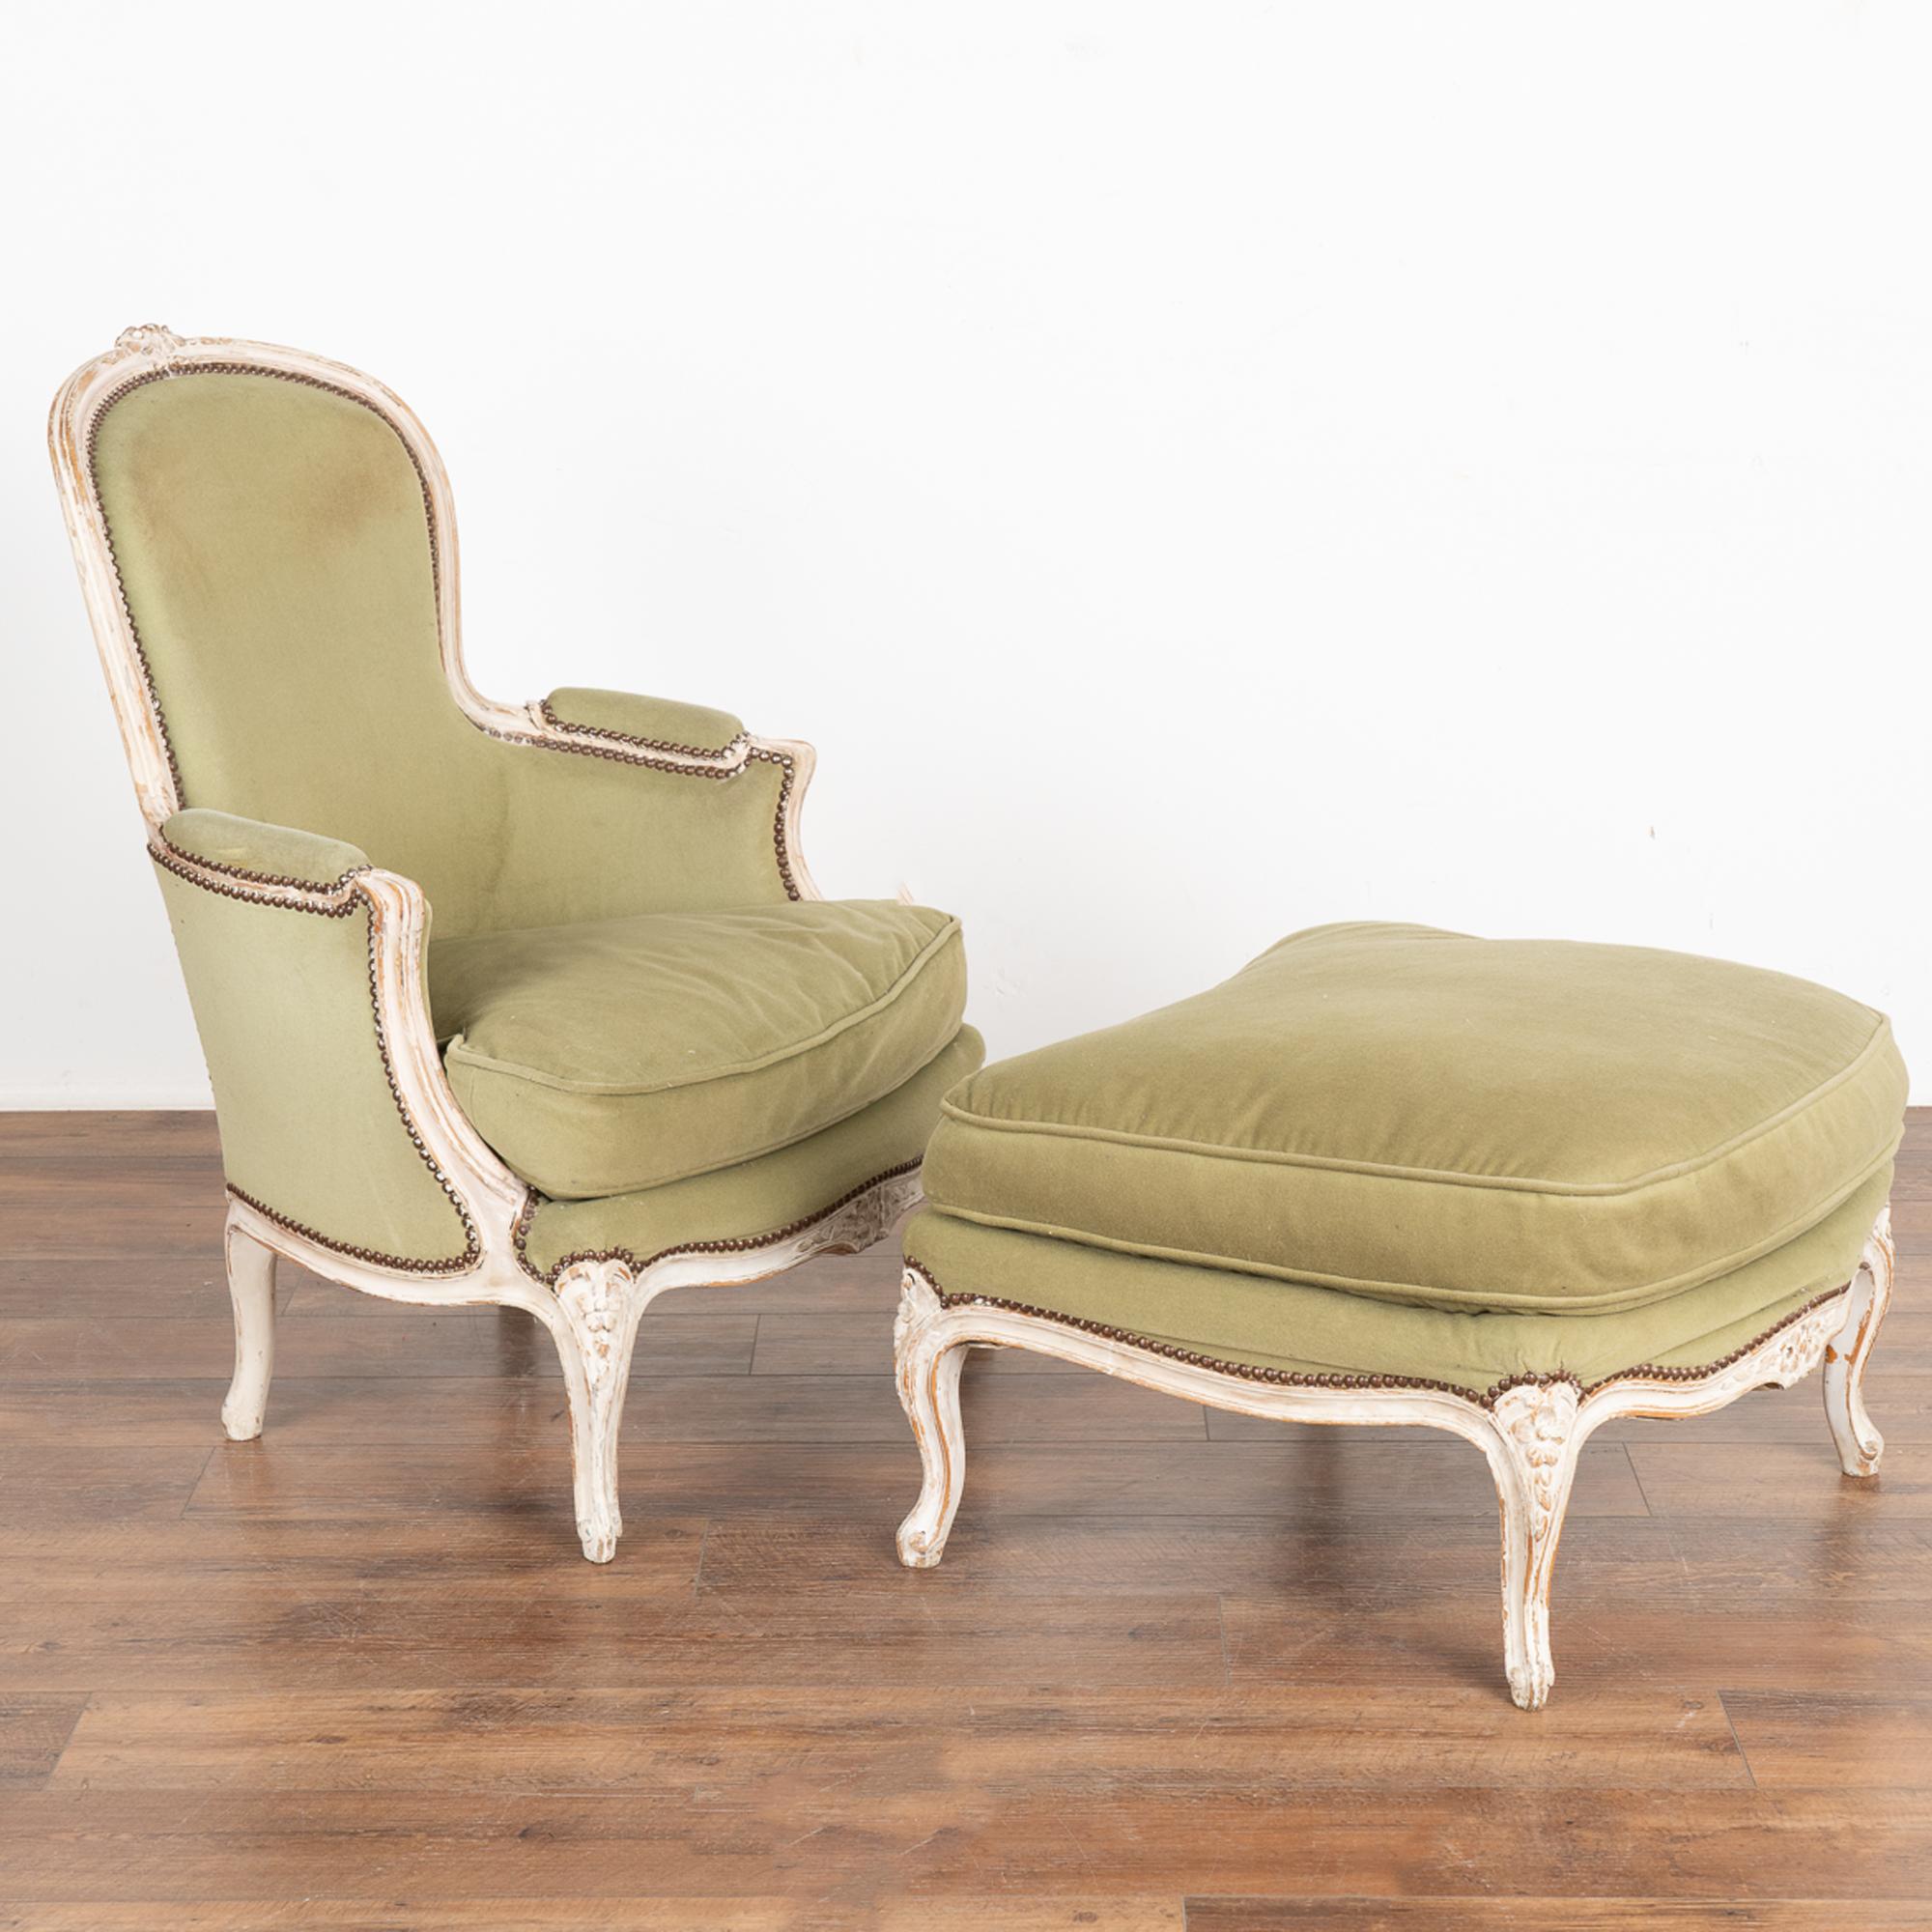 Rococo arm chair and matching ottoman from Sweden circa 1850-70.
Restored, frame is strong/stable. Later professionally painted in layered shades of white and lightly distressed to fit the age and grace of this lovely set.
Older green crushed velvet